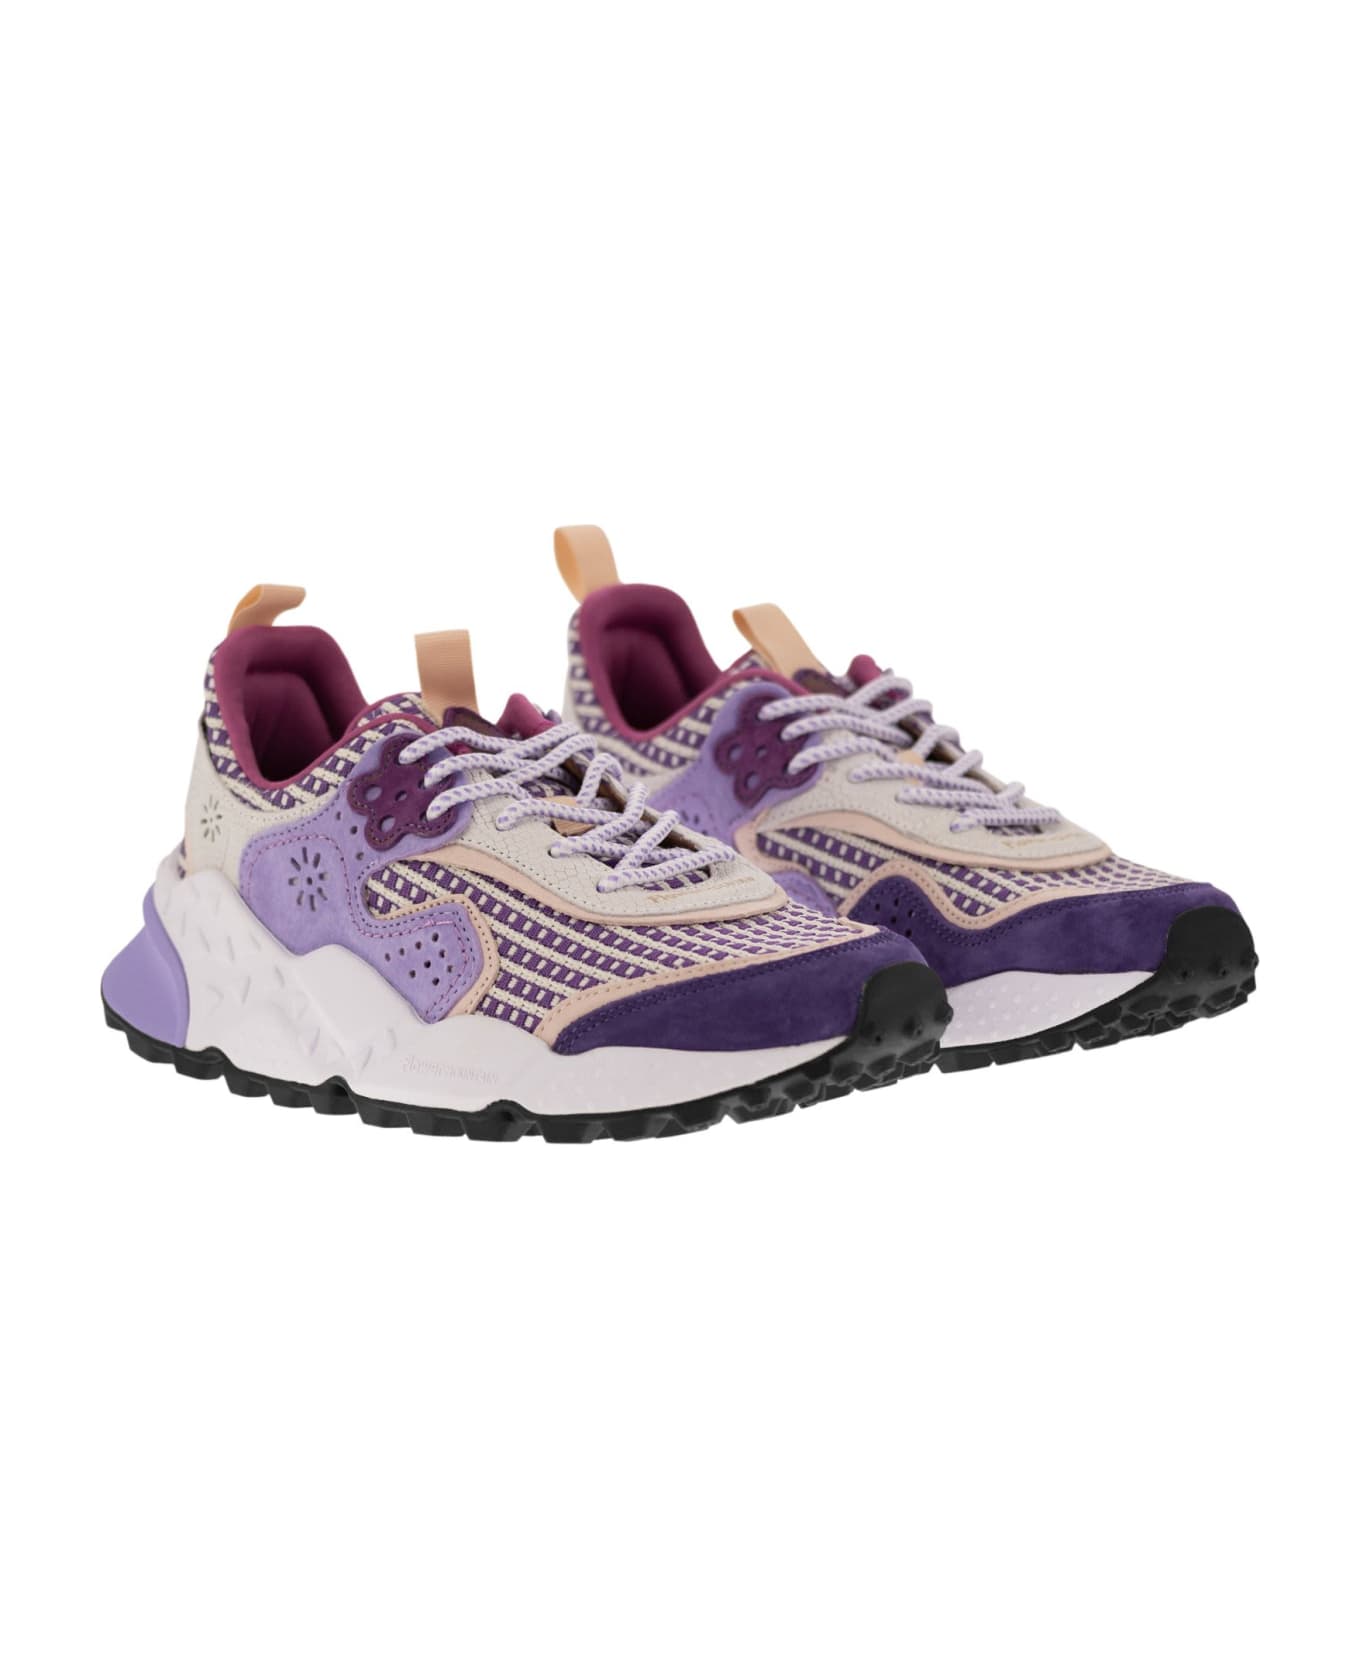 Flower Mountain Kotetsu - Sneakers In Suede And Technical Fabric - Purple